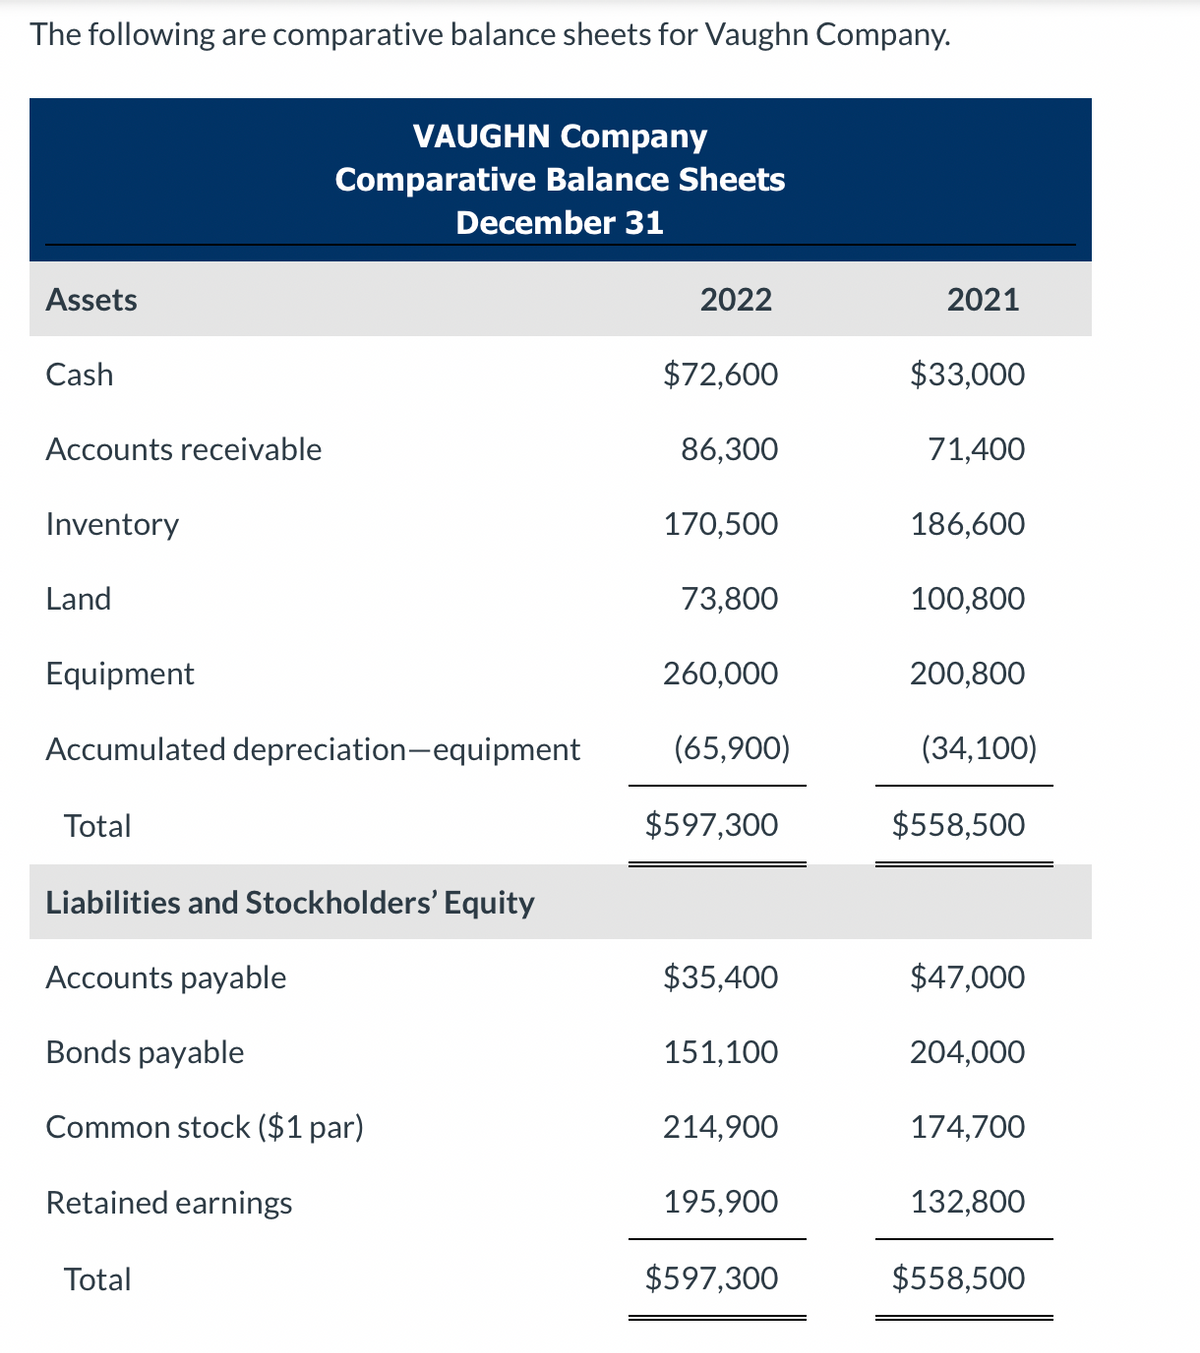 The following are comparative balance sheets for Vaughn Company.
Assets
Cash
Accounts receivable
Inventory
Land
Equipment
Accumulated depreciation-equipment
Total
VAUGHN Company
Comparative Balance Sheets
December 31
Liabilities and Stockholders' Equity
Accounts payable
Bonds payable
Common stock ($1 par)
Retained earnings
Total
2022
$72,600
86,300
170,500
73,800
260,000
(65,900)
$597,300
$35,400
151,100
214,900
195,900
$597,300
2021
$33,000
71,400
186,600
100,800
200,800
(34,100)
$558,500
$47,000
204,000
174,700
132,800
$558,500